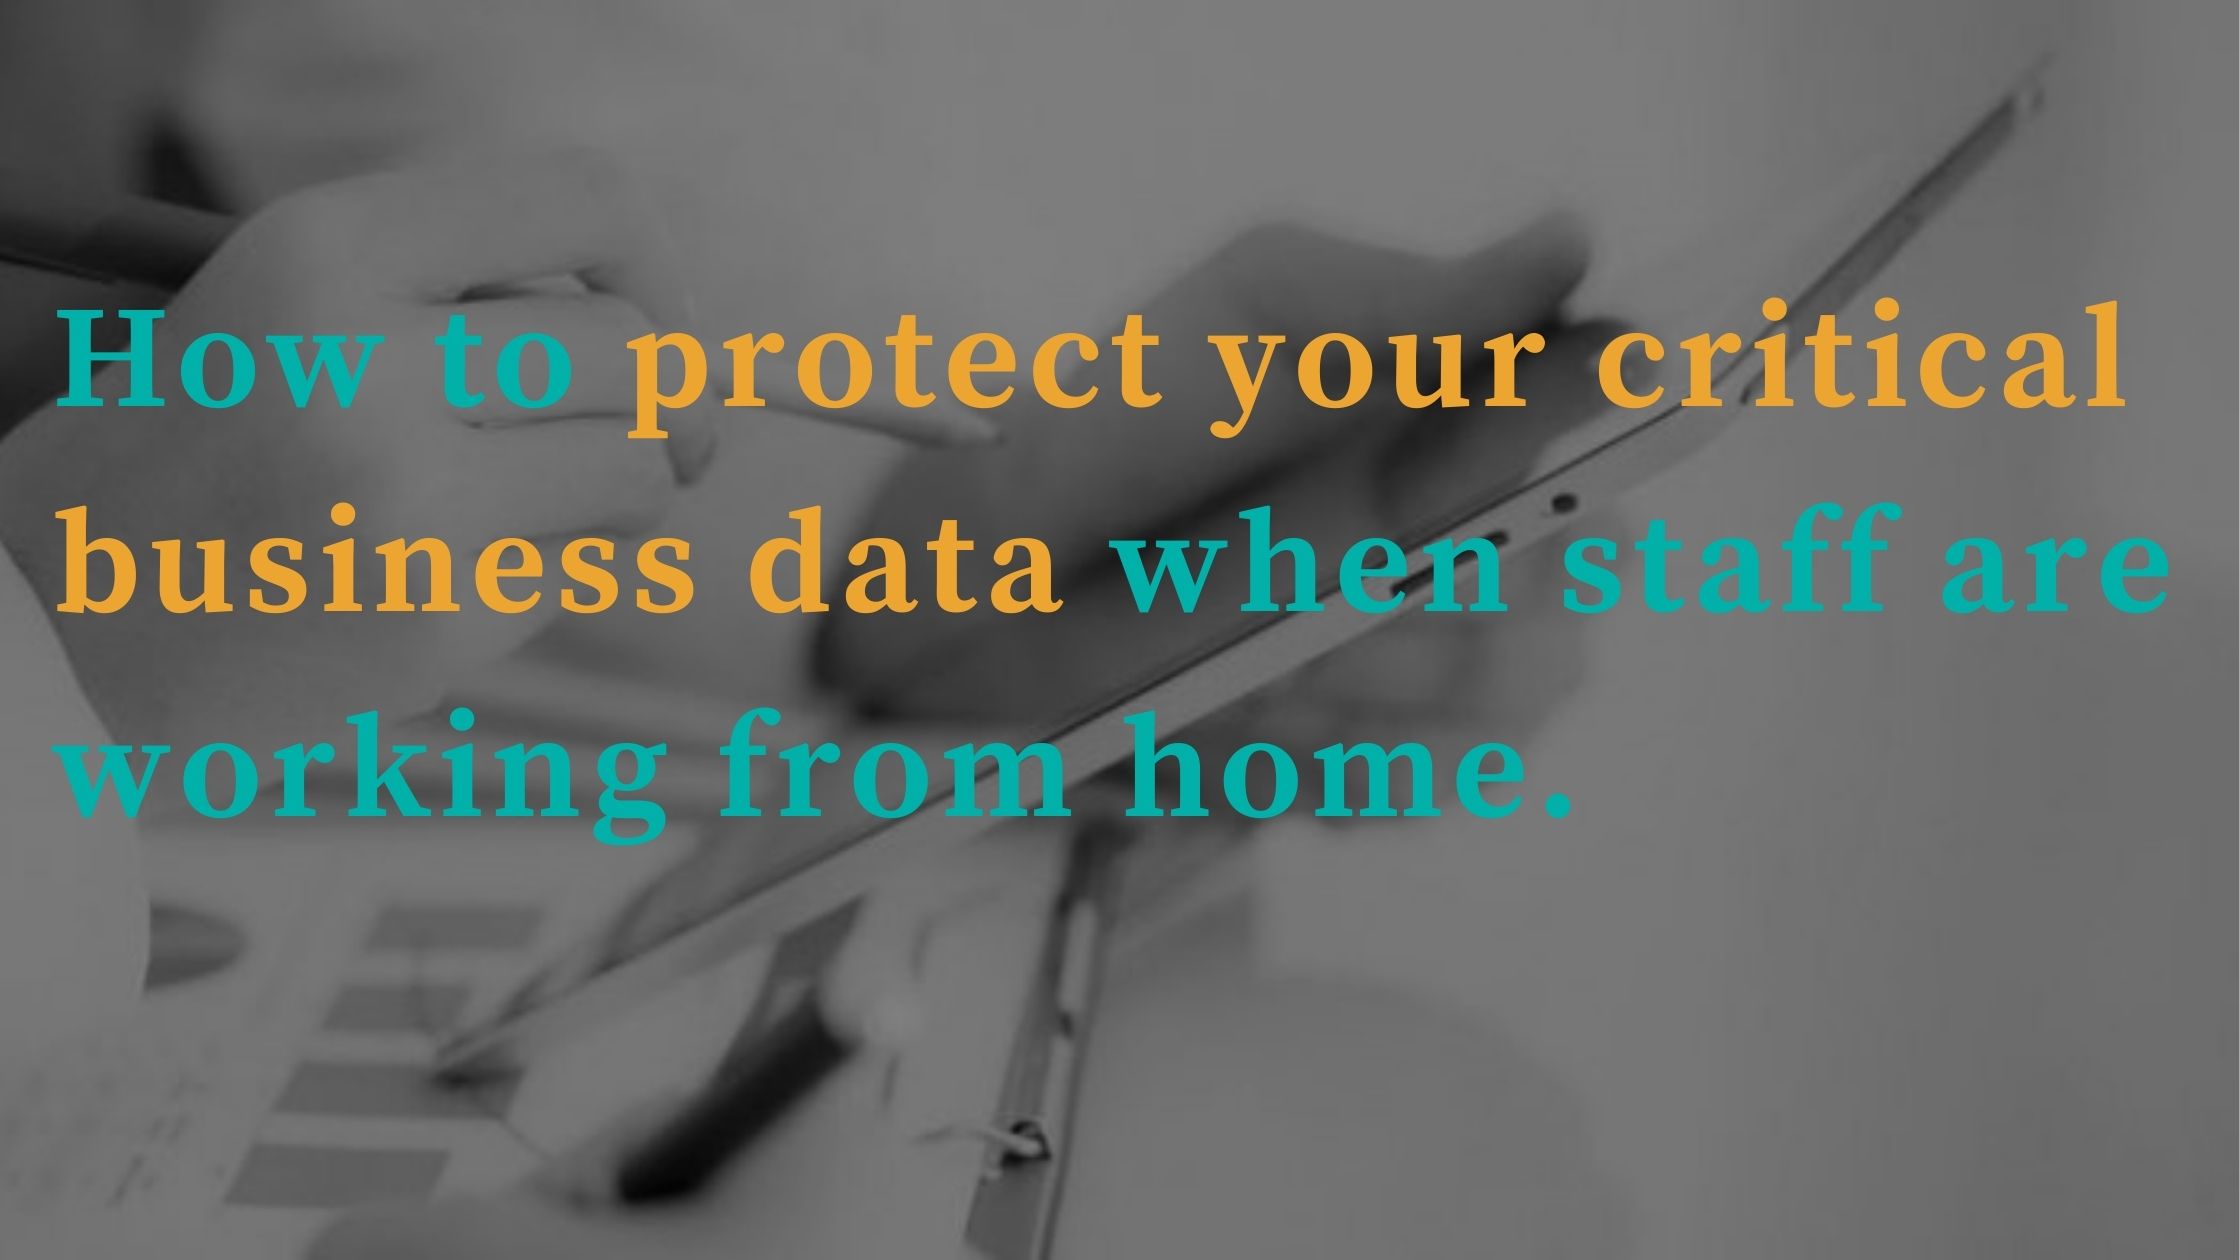 Protecting your data when staff are working from home